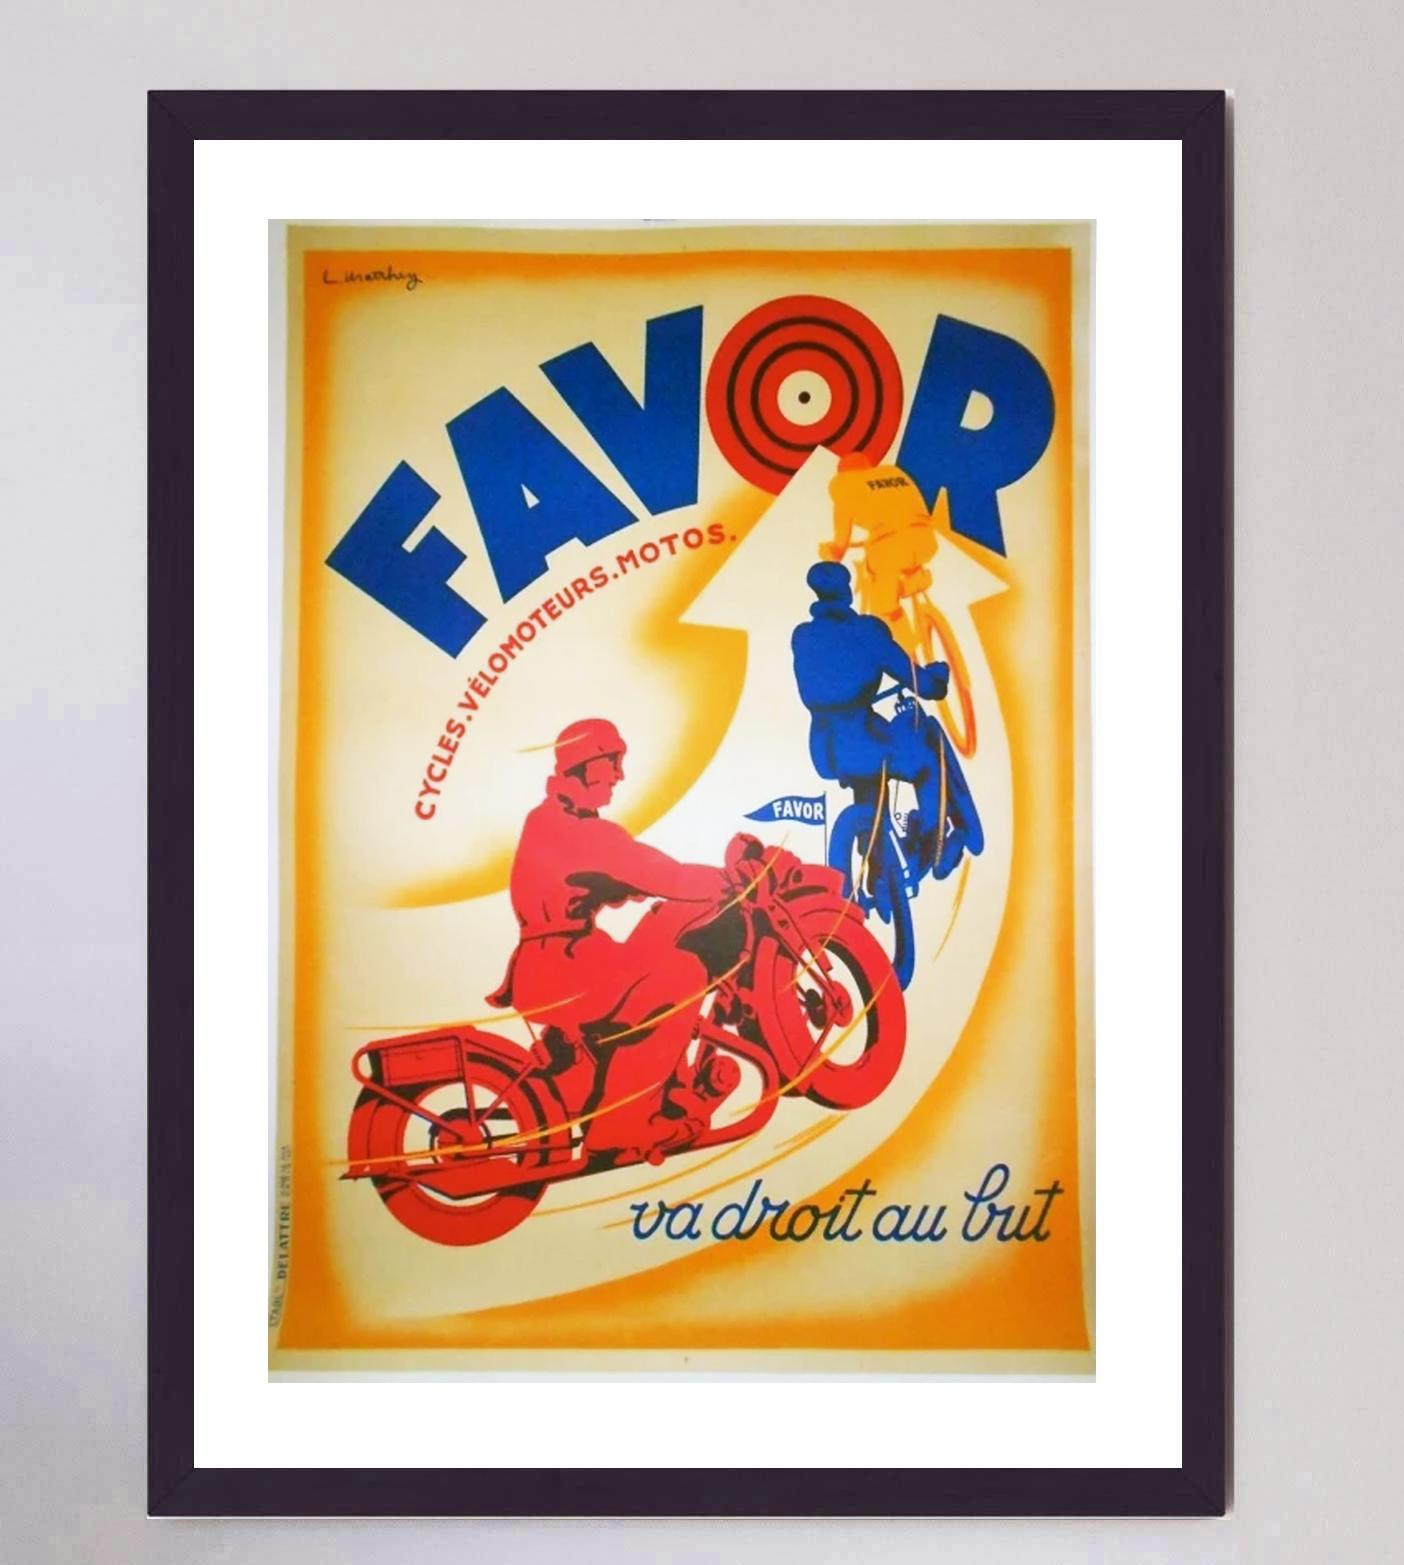 Absolutely gorgeous original lithograph from 1928 for Favor. Founded in 1898 as a bicycle manufacturer, Favor moved onto producing motorbikes and continued to trade until the 1970s. This colourful and fun poster showcases this range, reading